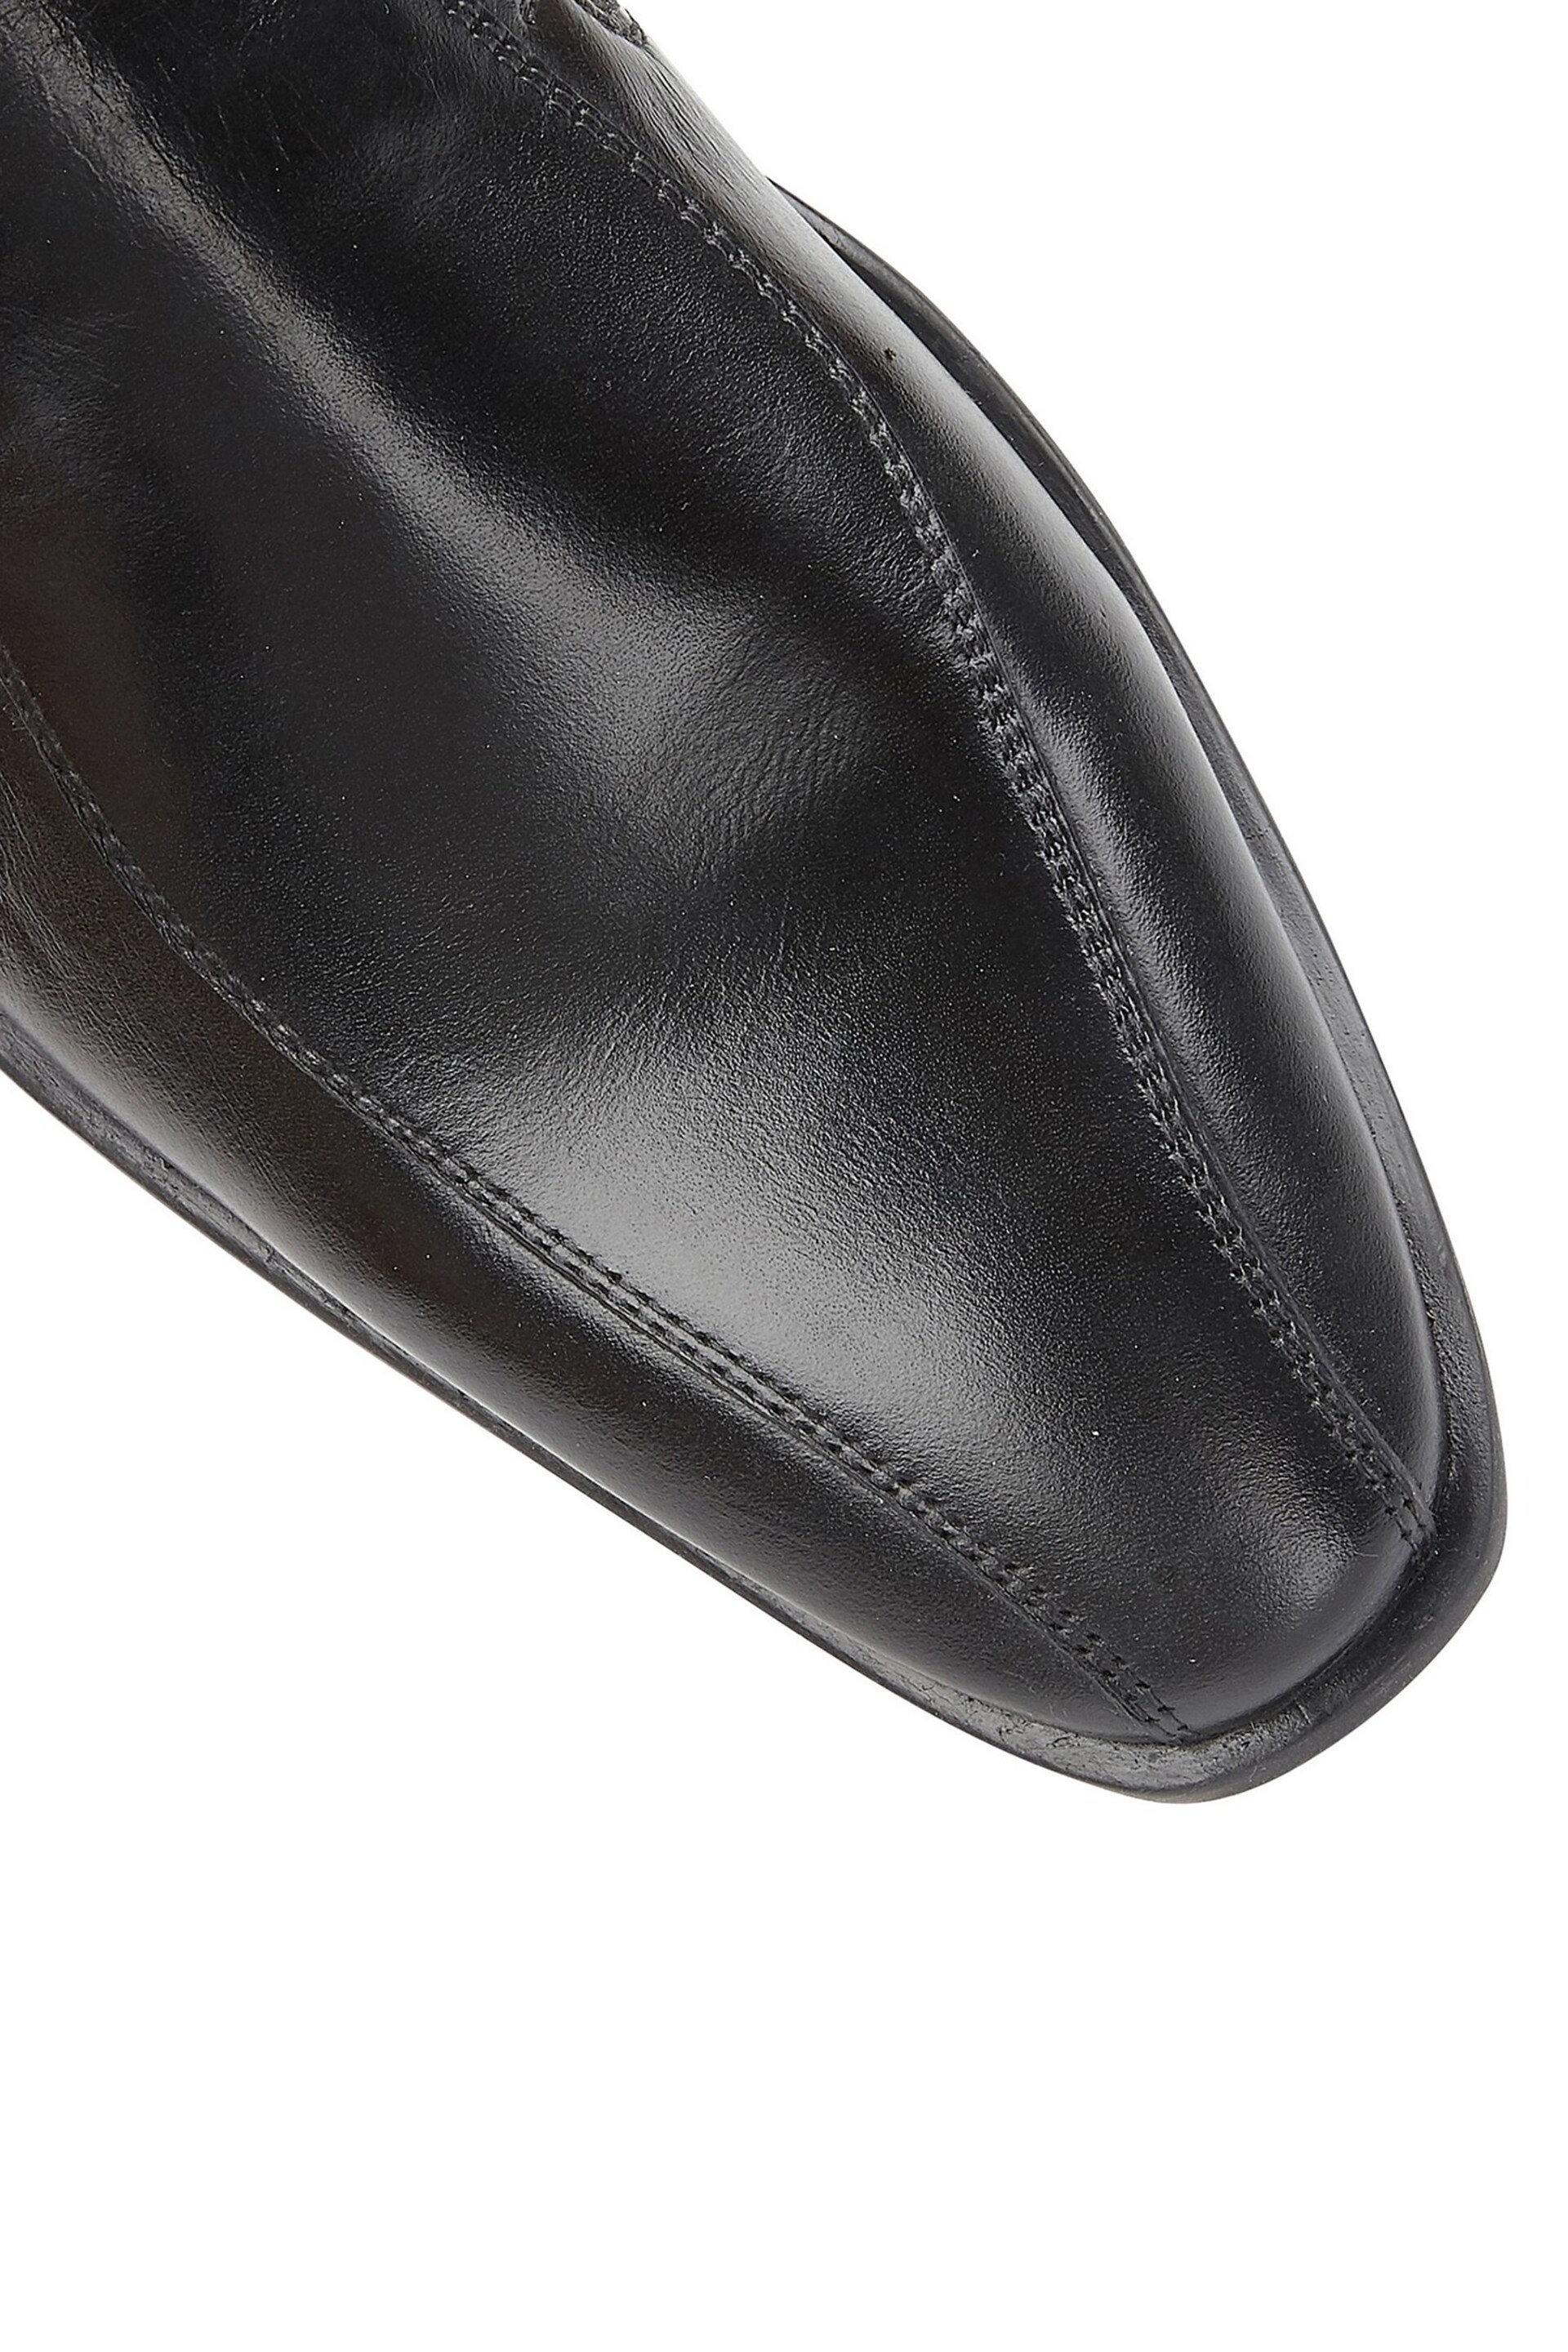 Lotus Black Leather Loafers - Image 5 of 5